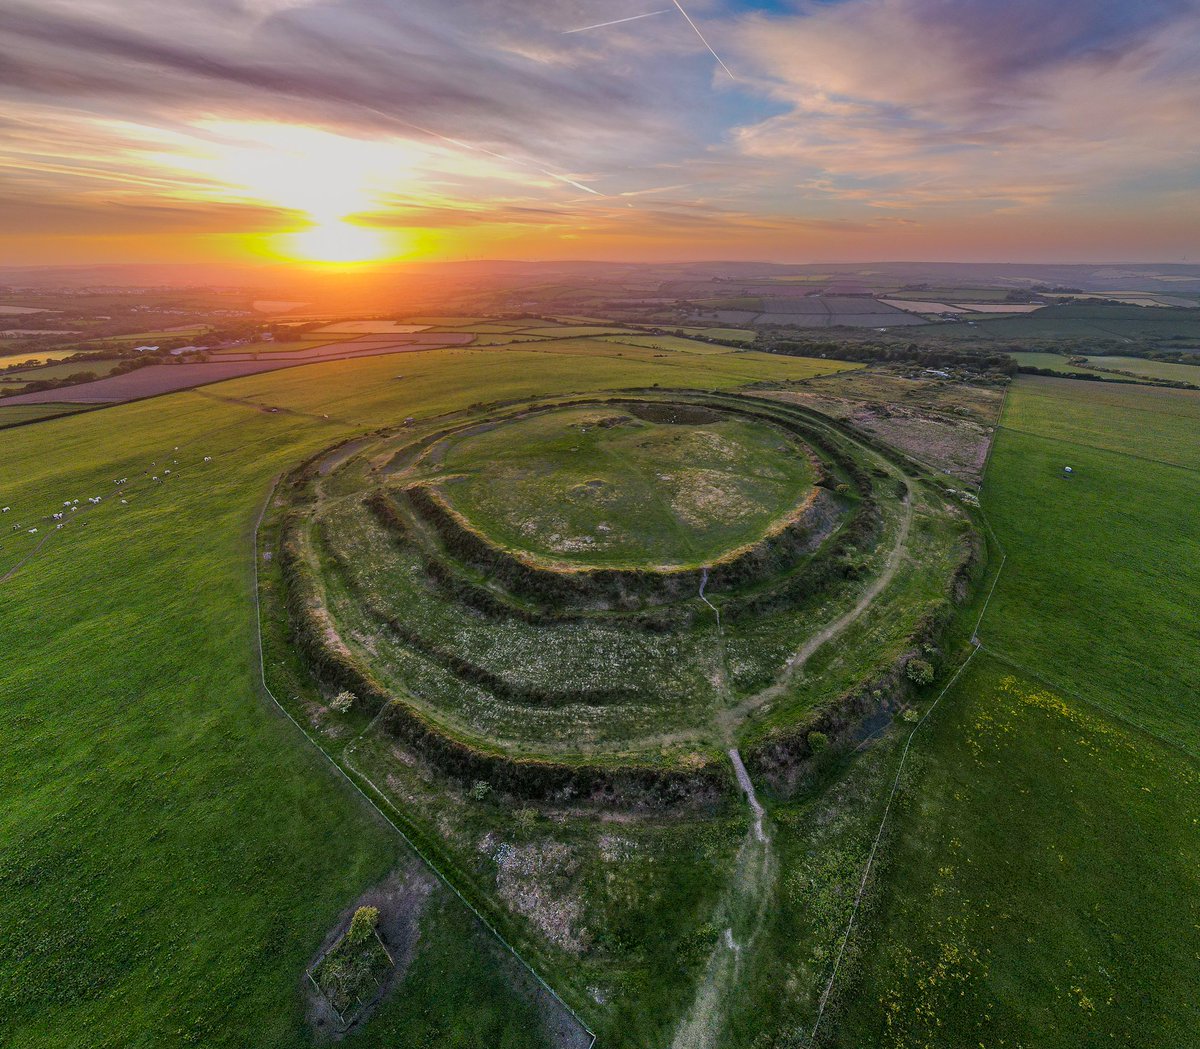 Last nights stunning sunset at castle an Dinas #Cornwall #kernow #HillfortsWednesday #archaeology #History